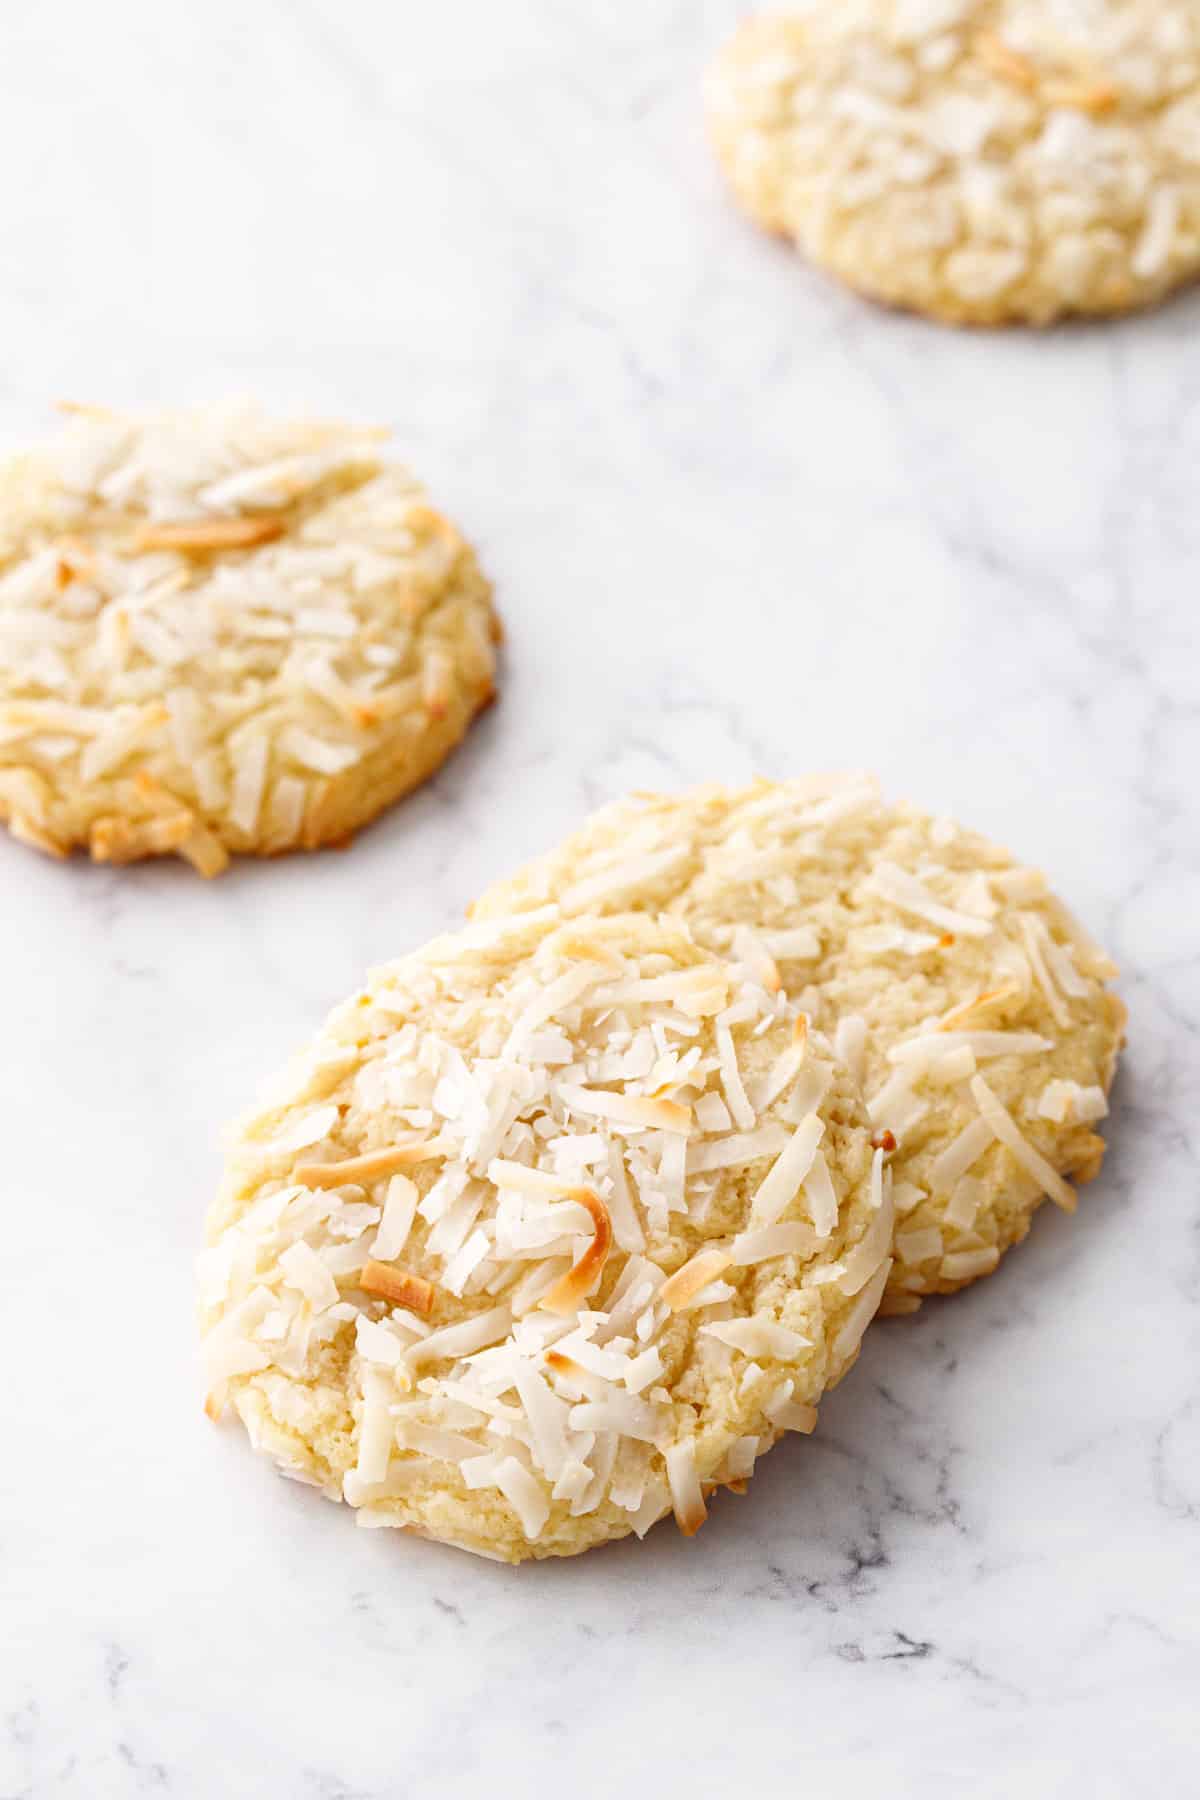 Toasted Coconut Sugar Cookies with visible coconut shreds on top, on a white marble background.